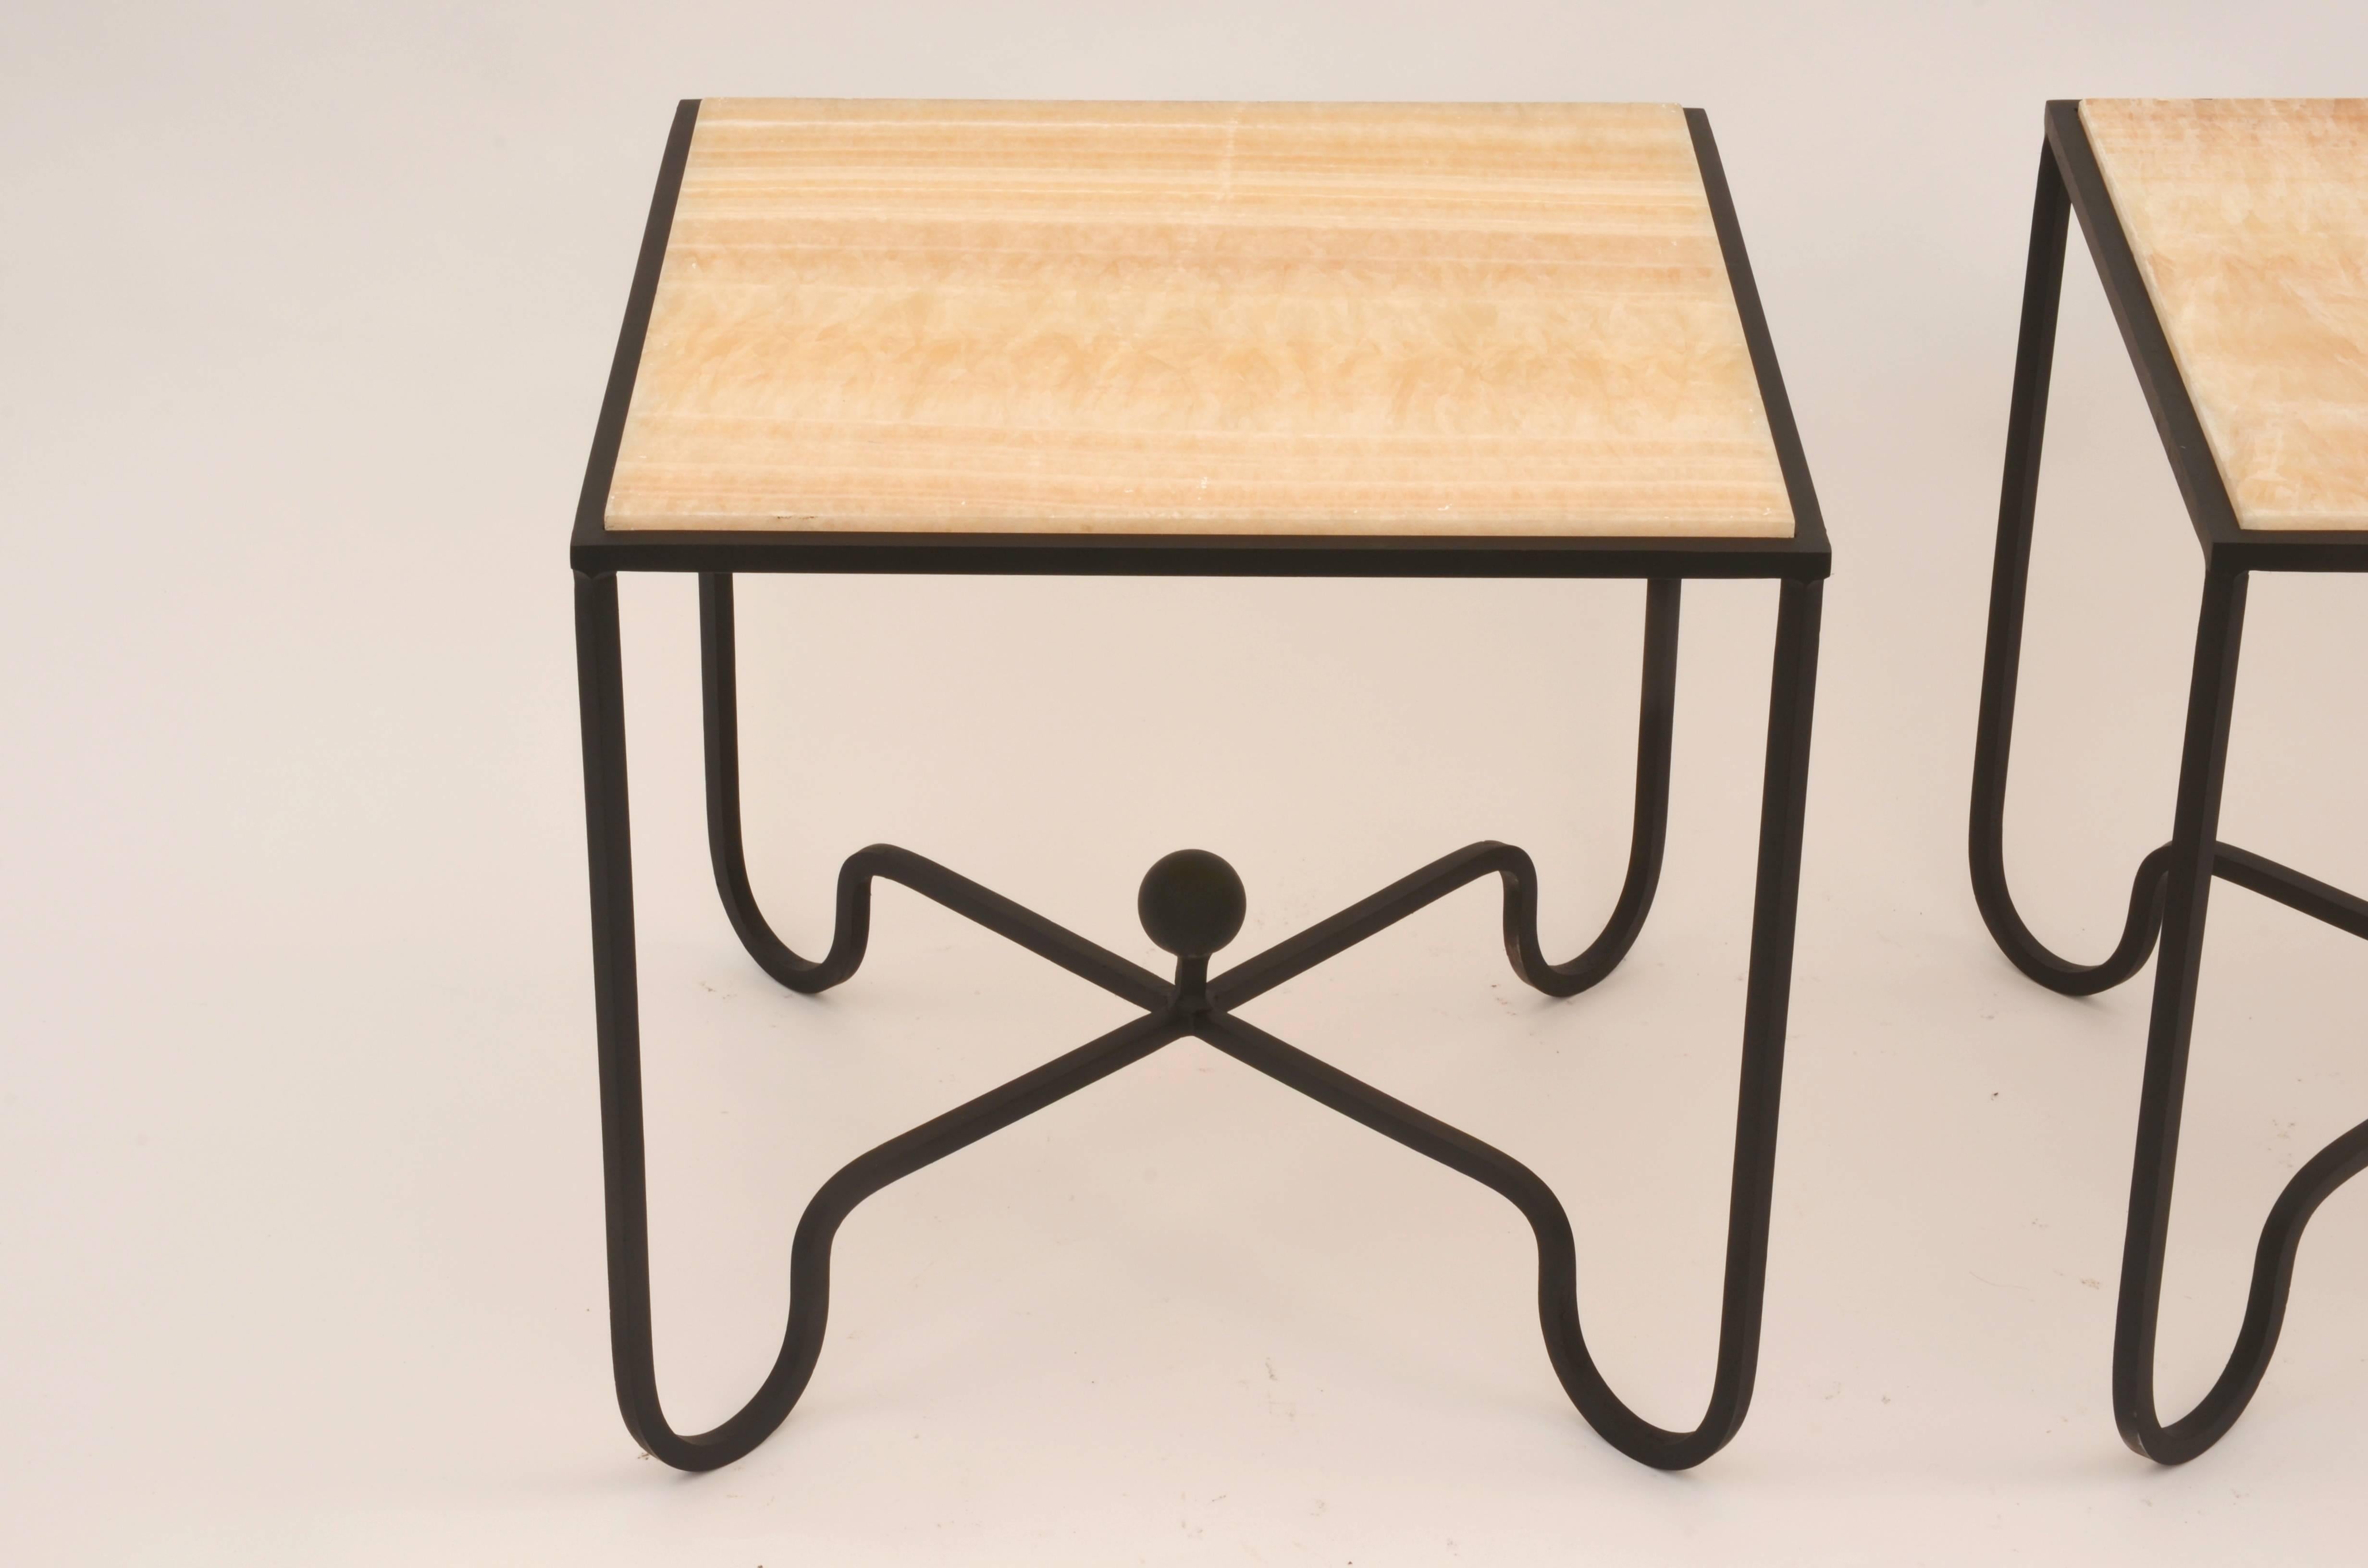 Polished Pair of 'Entretoise' Wrought Iron and Onyx Side Tables by Design Frères For Sale